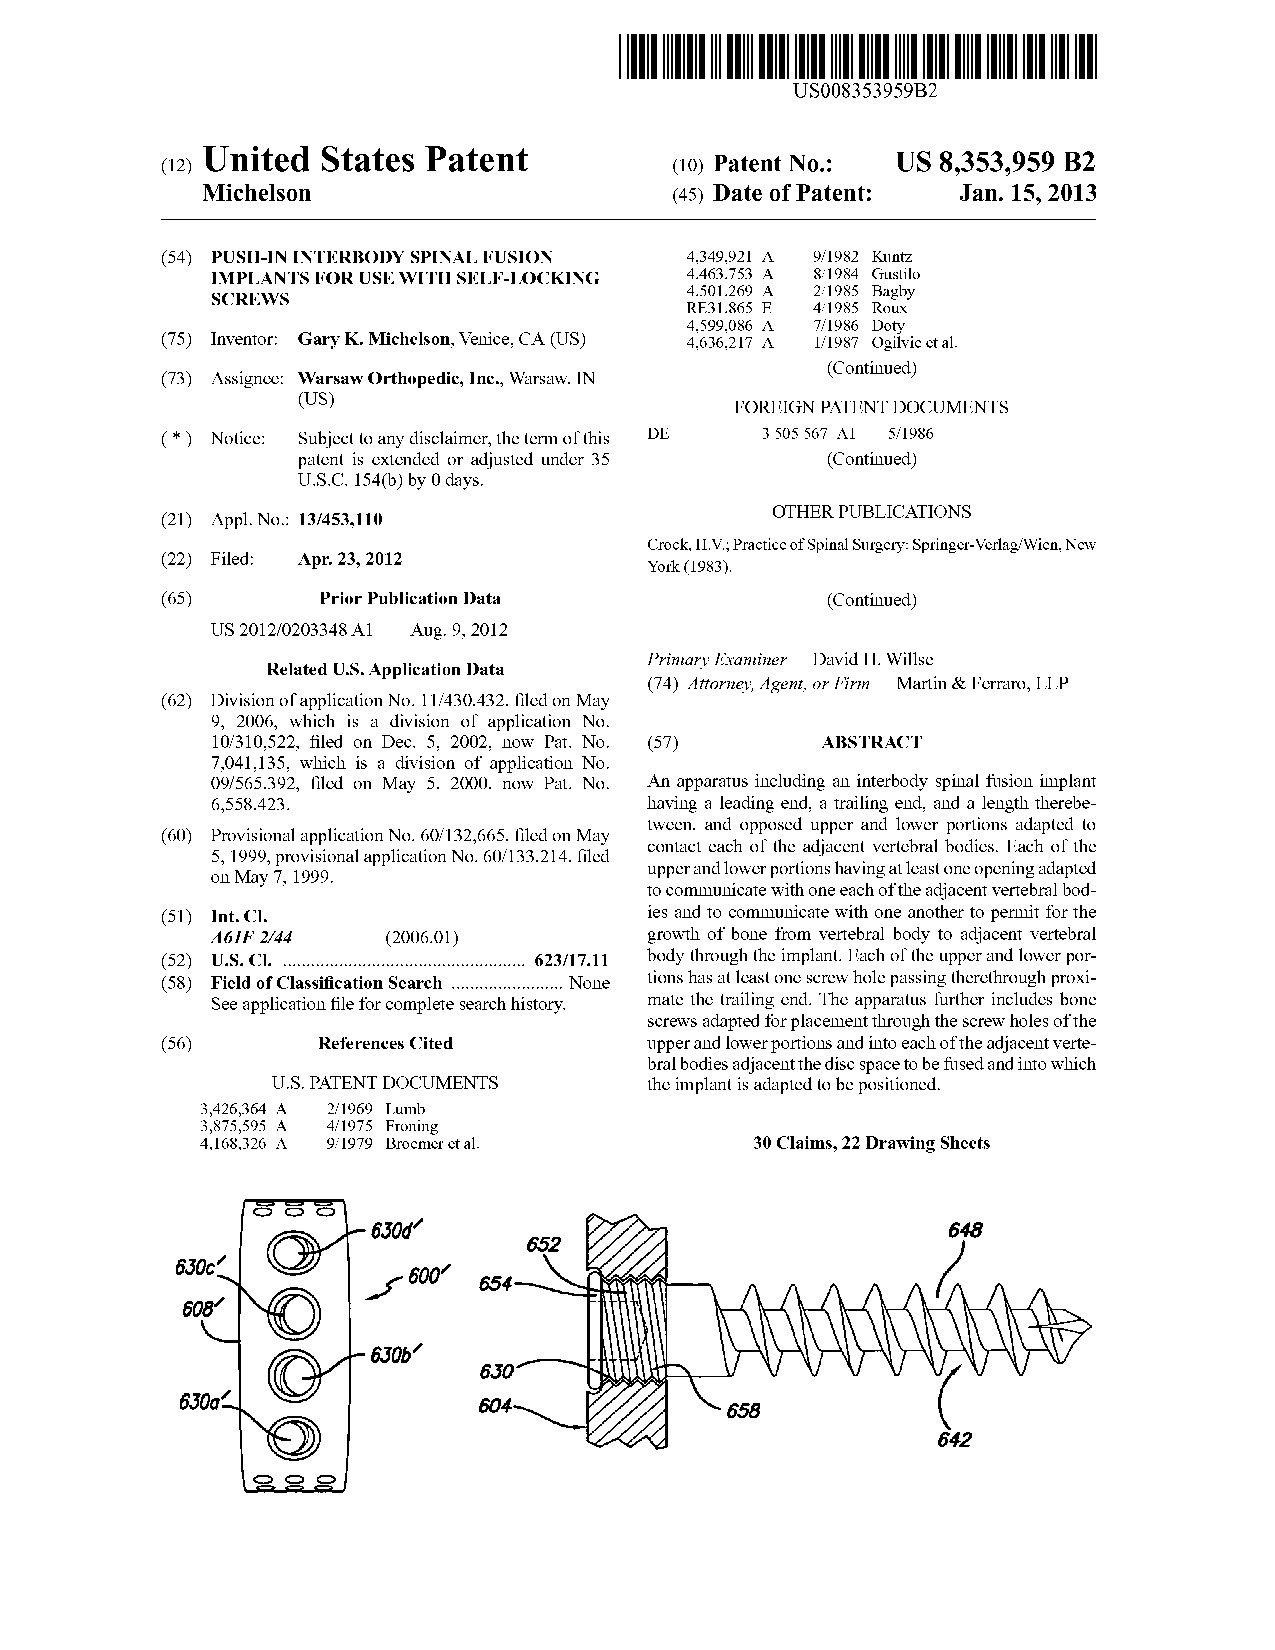 Push-in interbody spinal fusion implants for use with self-locking screws - Patent 8,353,959